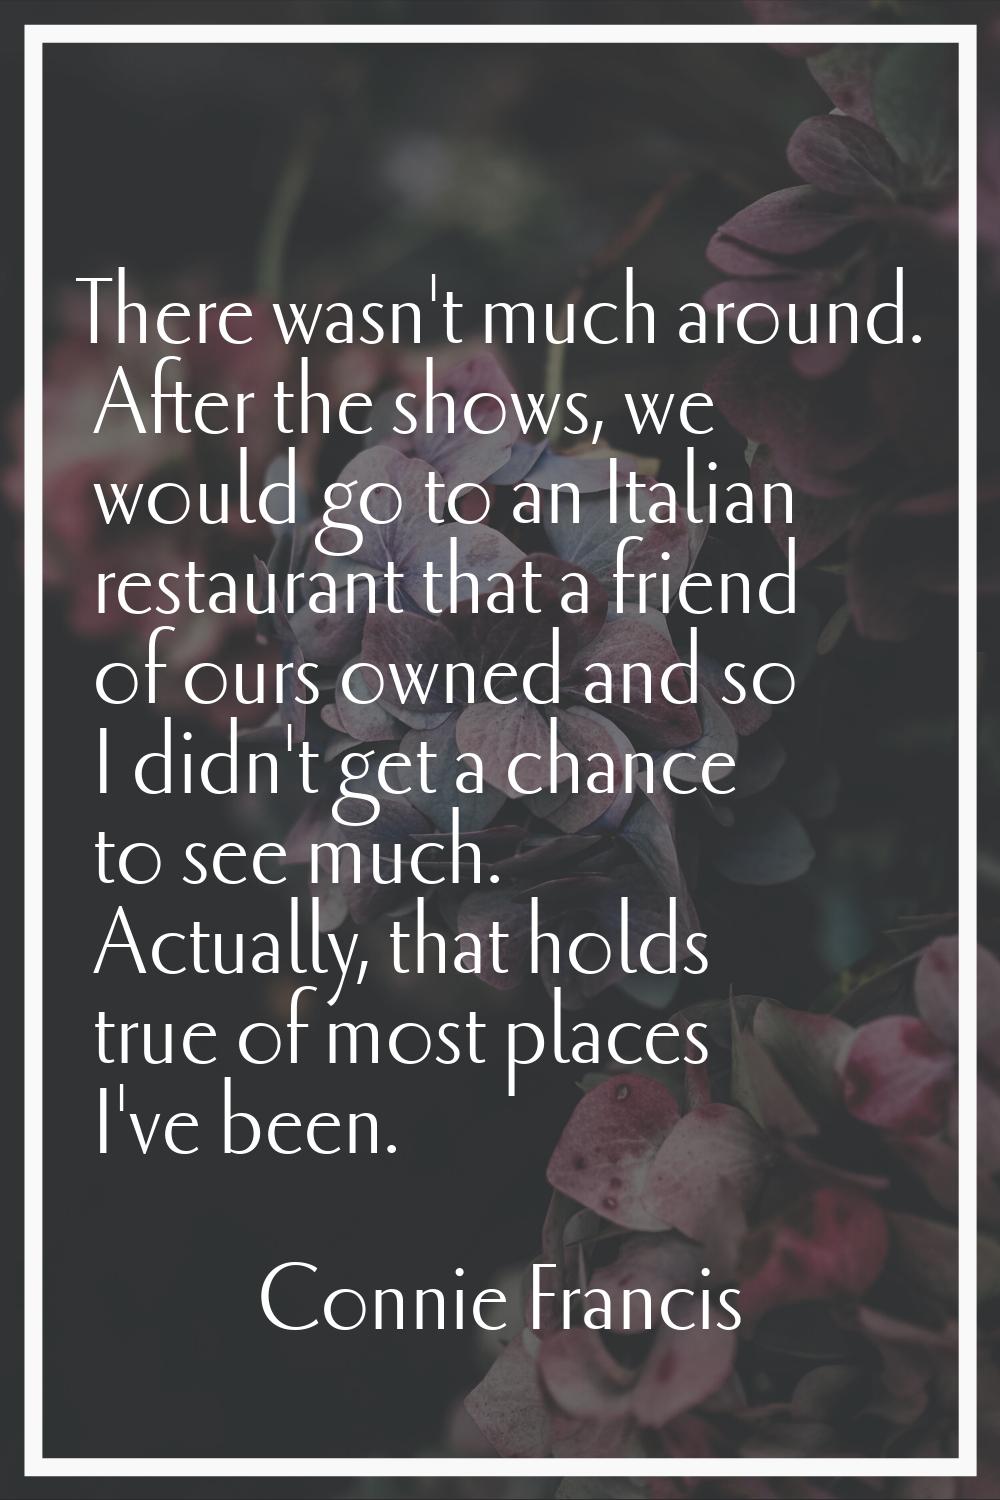 There wasn't much around. After the shows, we would go to an Italian restaurant that a friend of ou